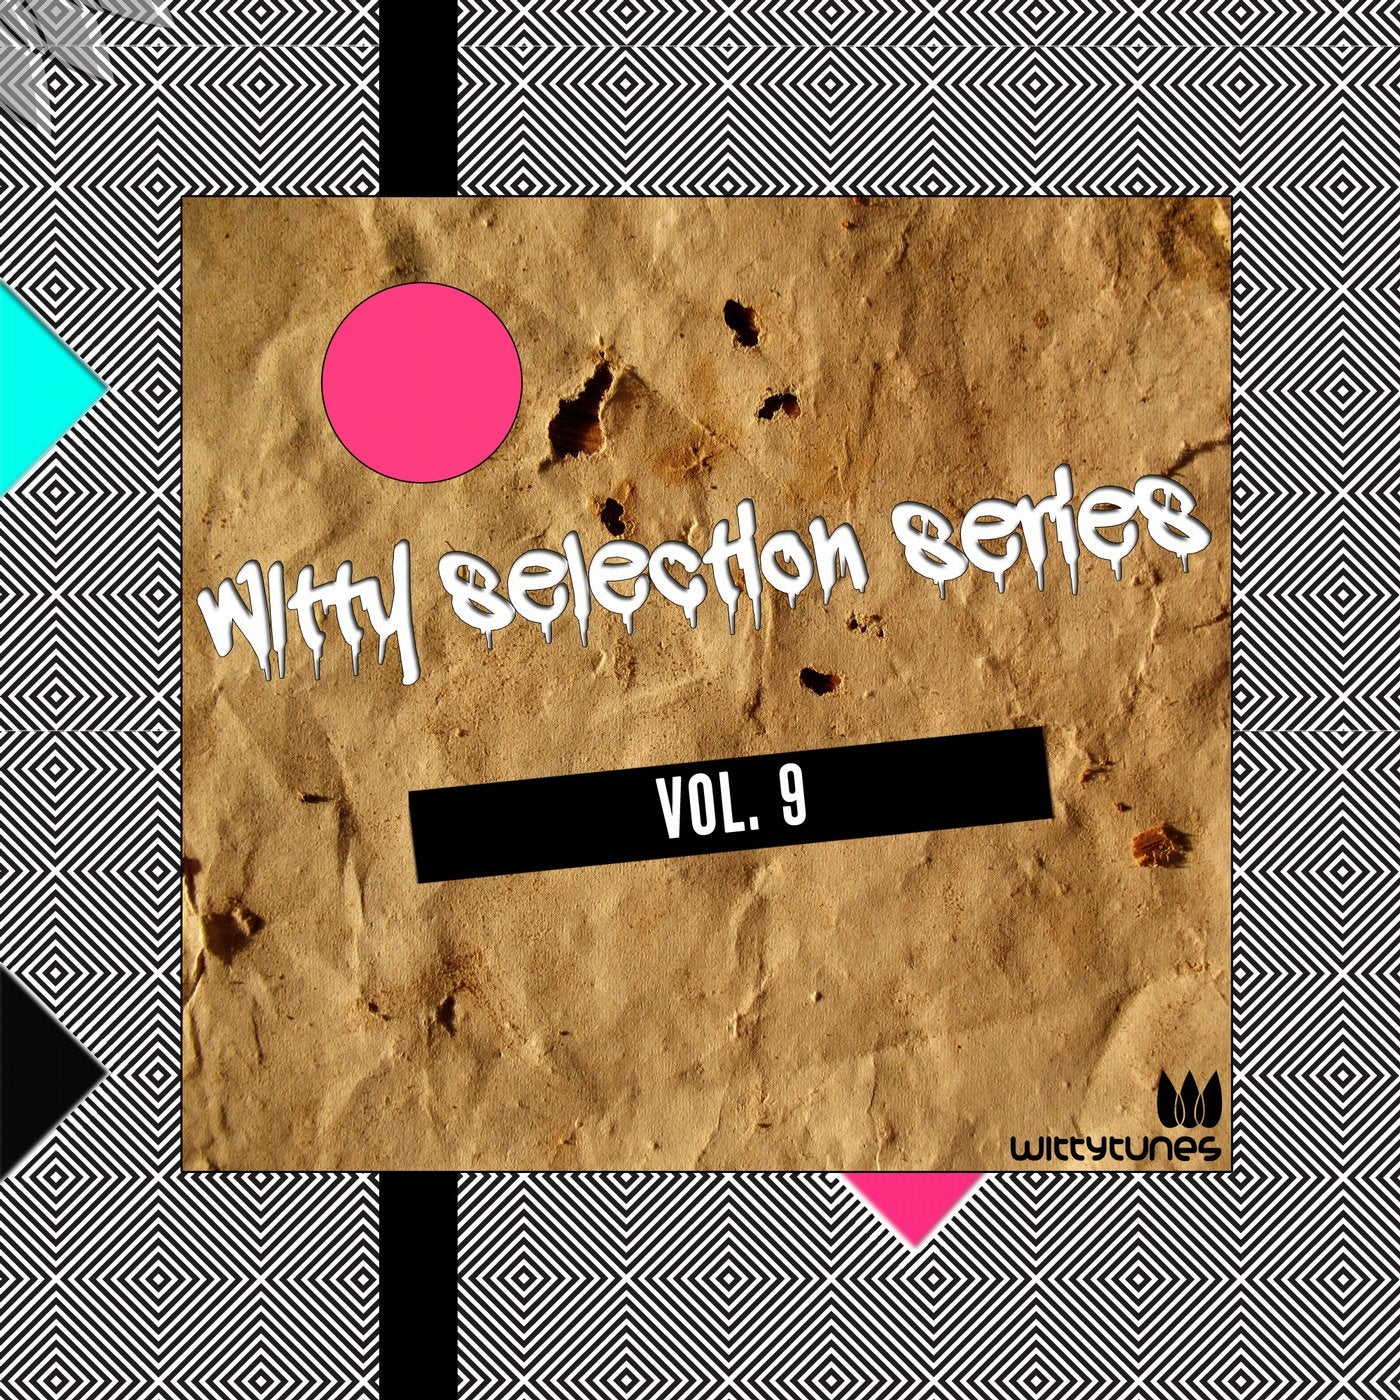 Witty Selection Series Vol. 9